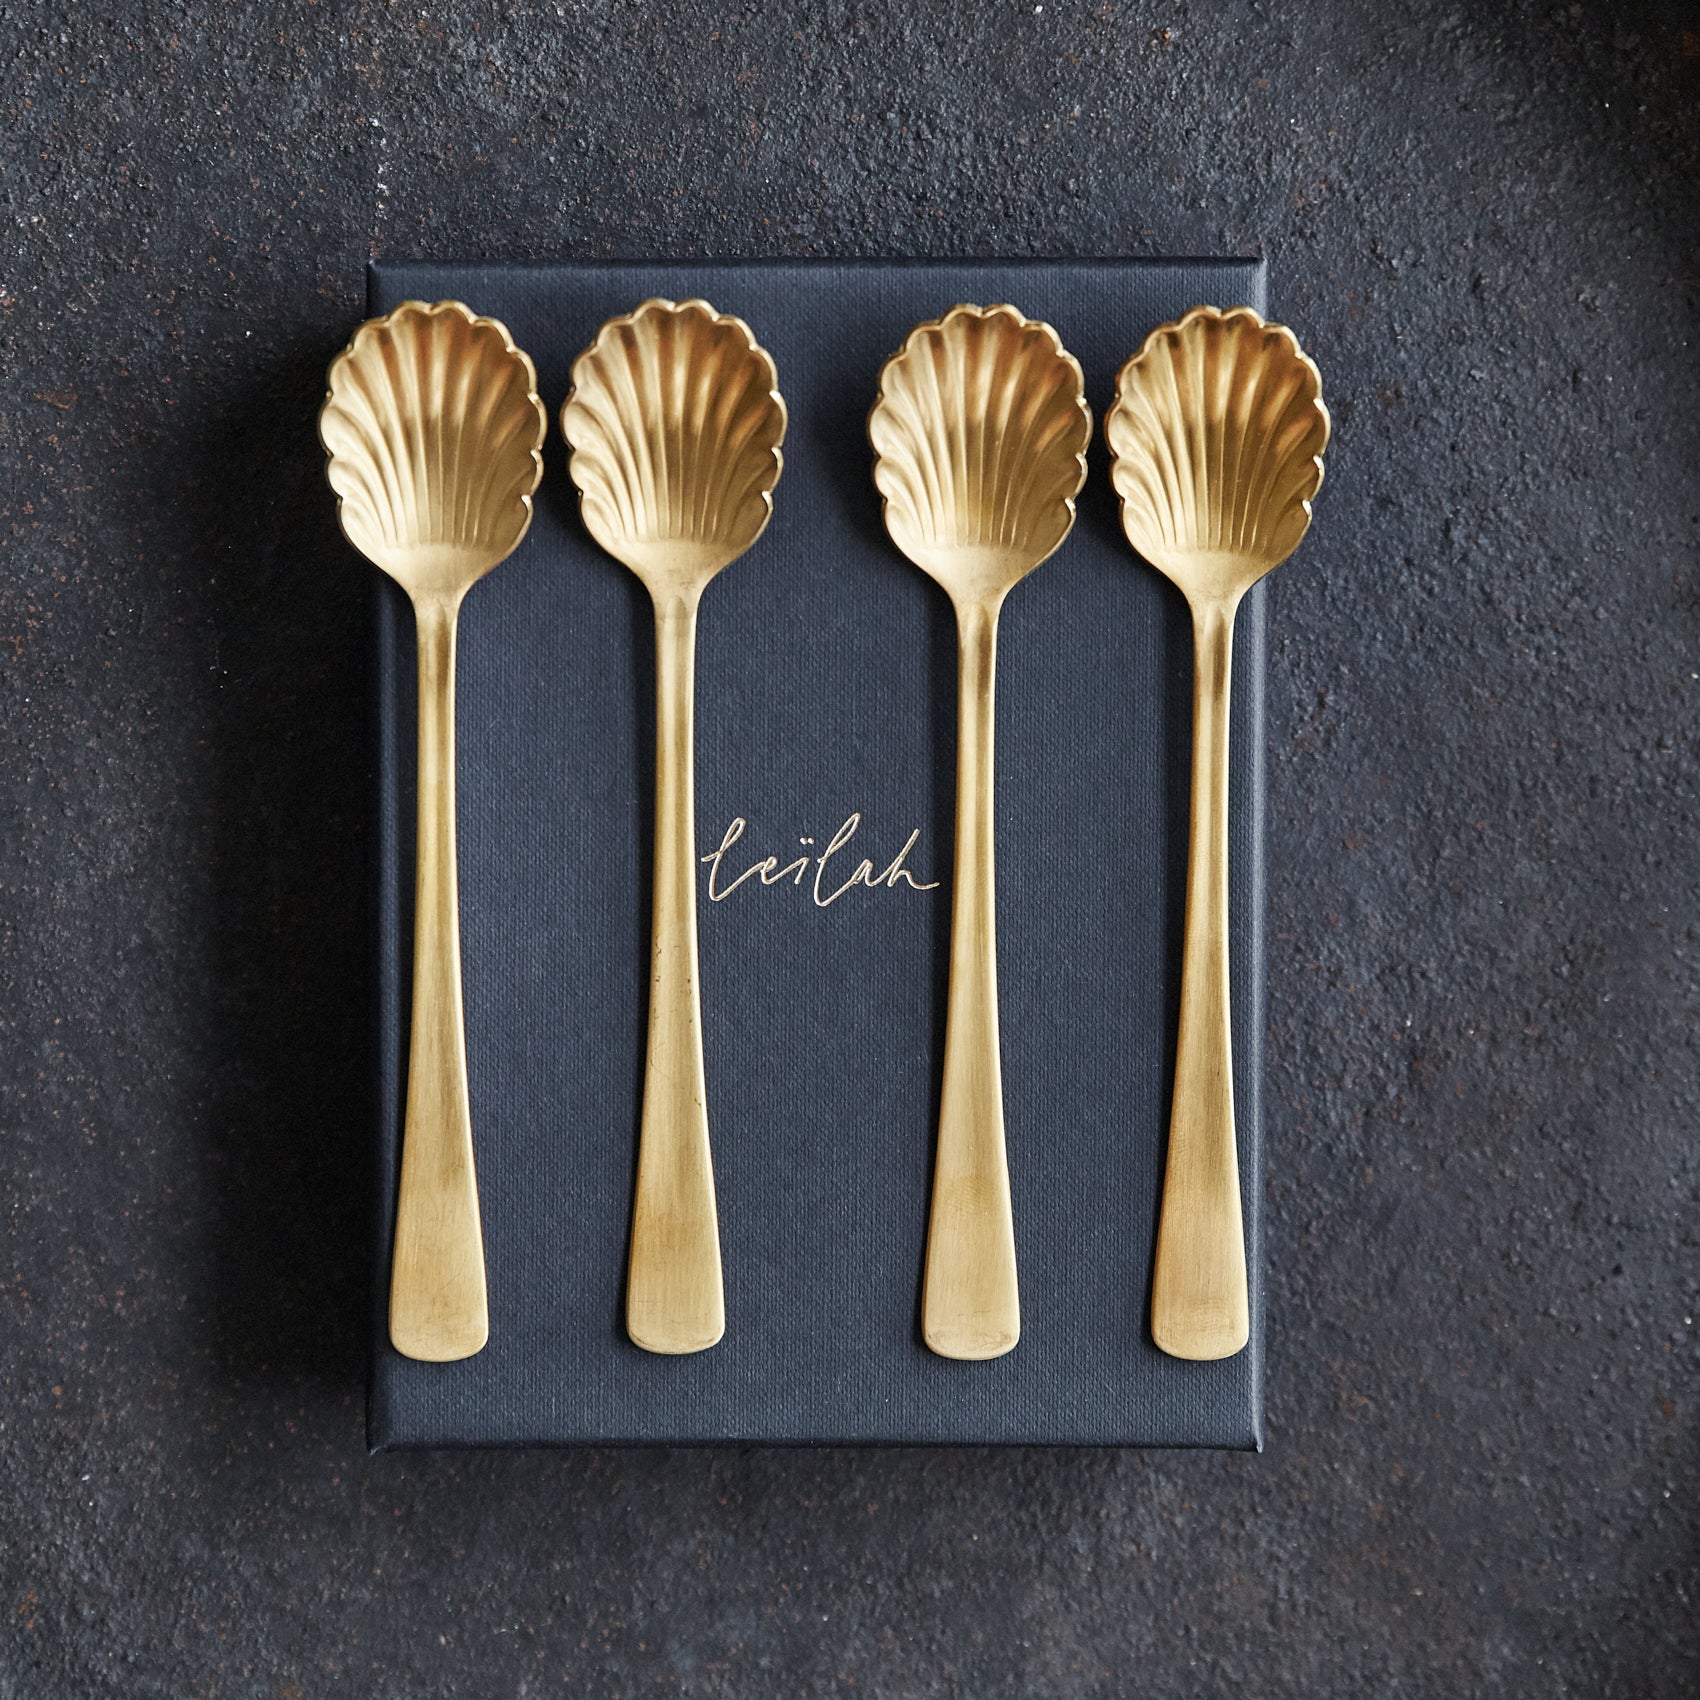 STAINLESS STEEL CLAM SHELL SPOONS BOXED SET 4